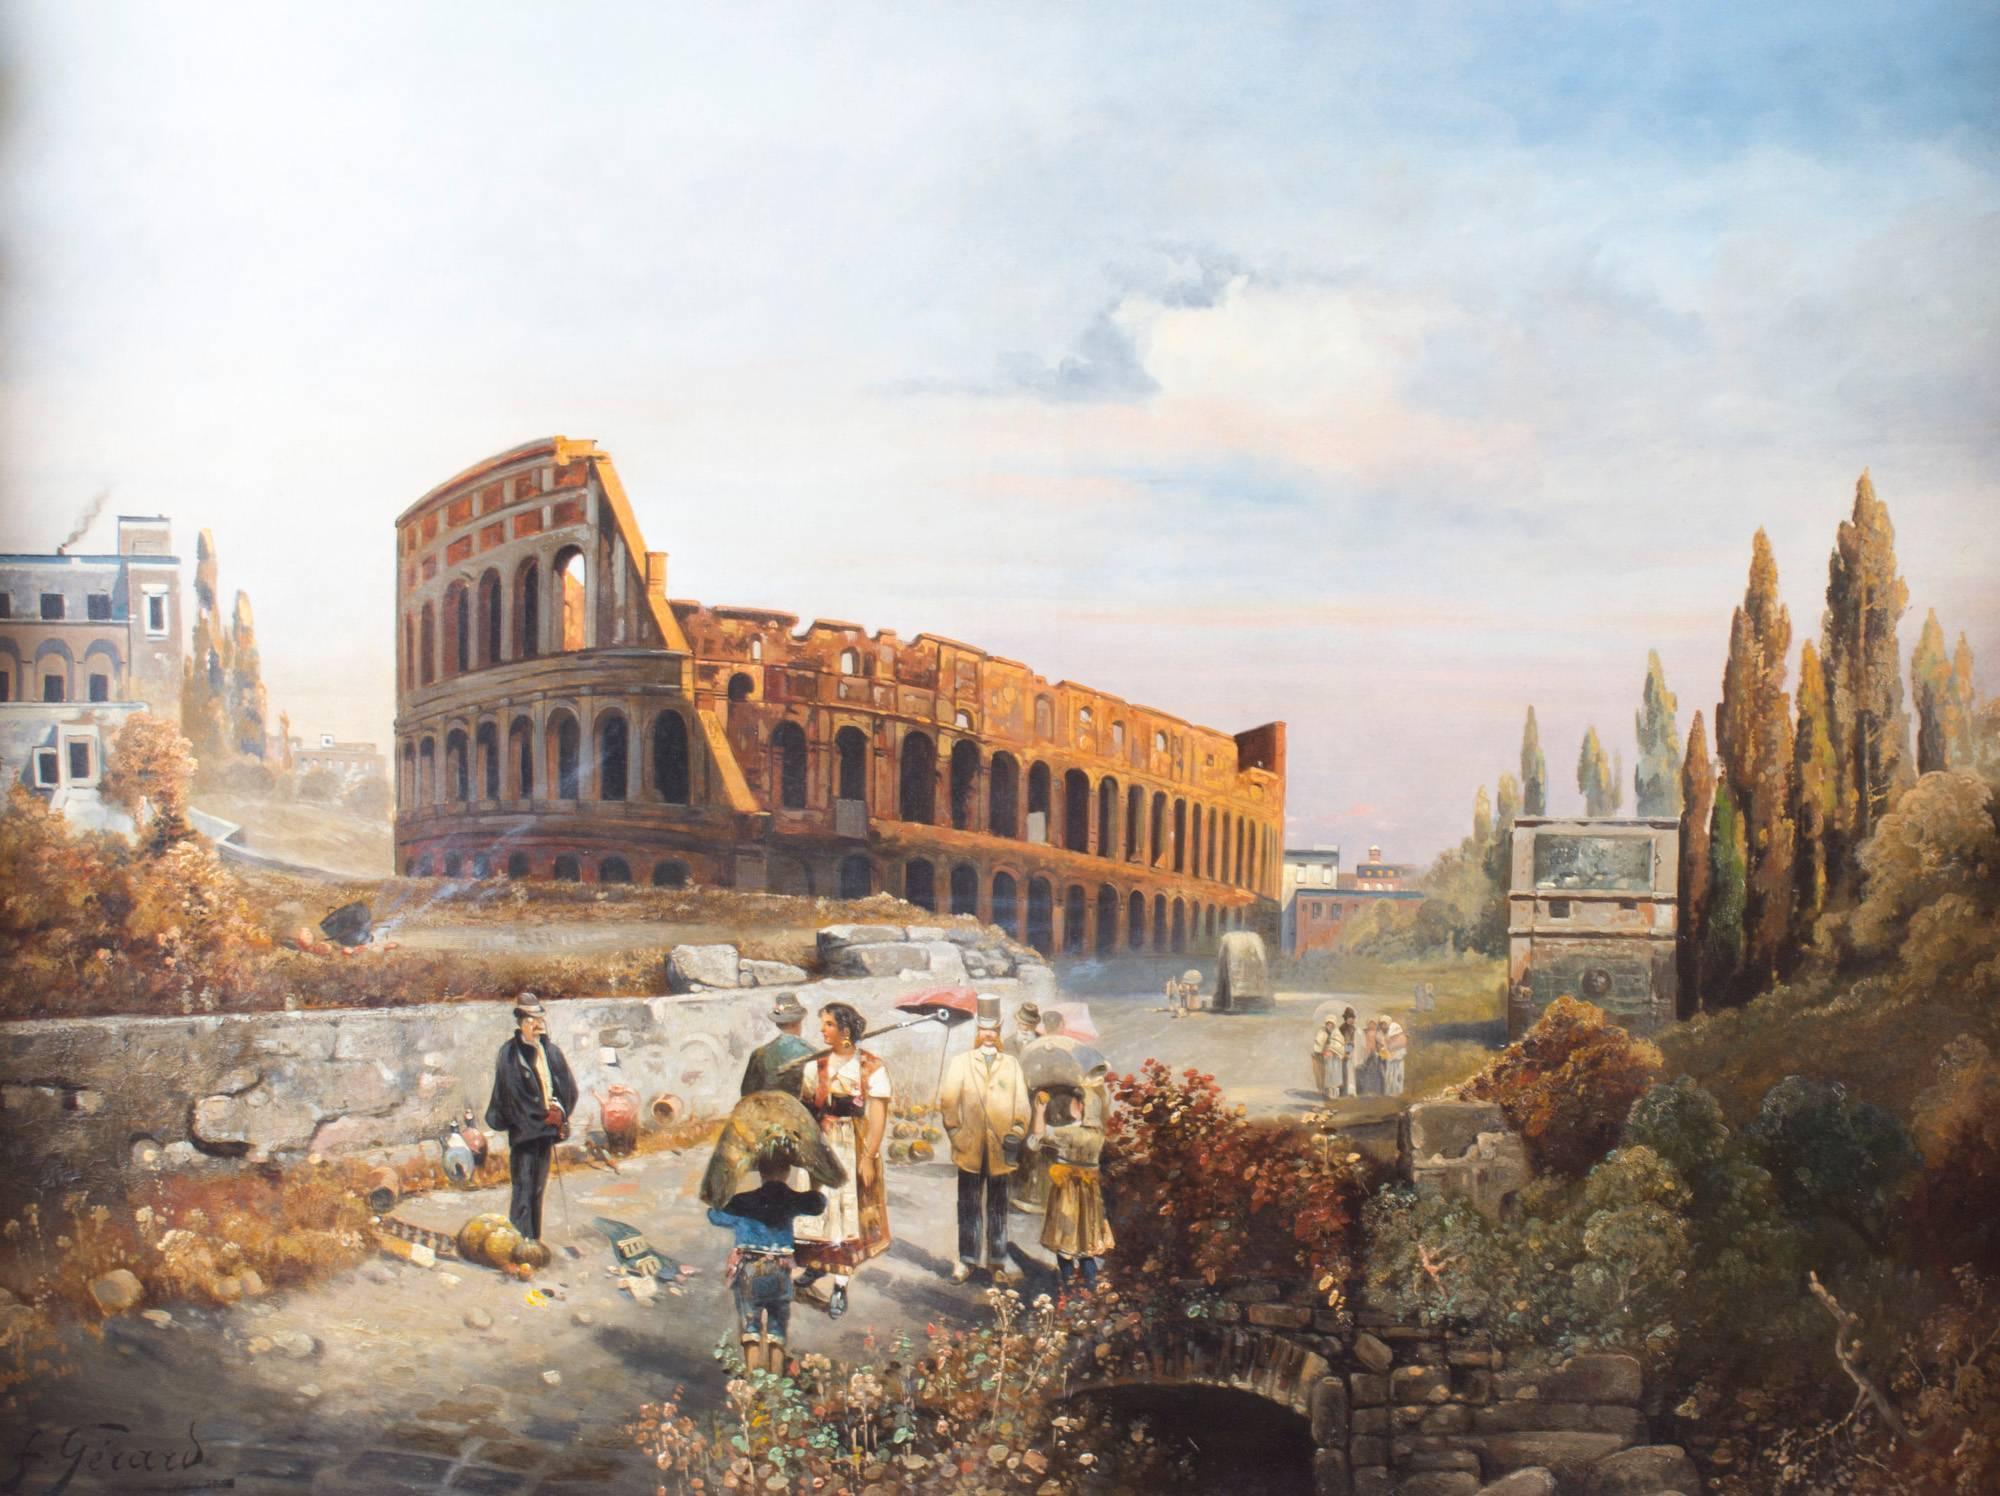 This is a beautiful oil on canvas painting of the colosseum in the centre of Rome by the renowned French artist François Gérard (1770-1837) and signed lower left.

This beautiful landscape captures a striking view of the Colosseum, also known as